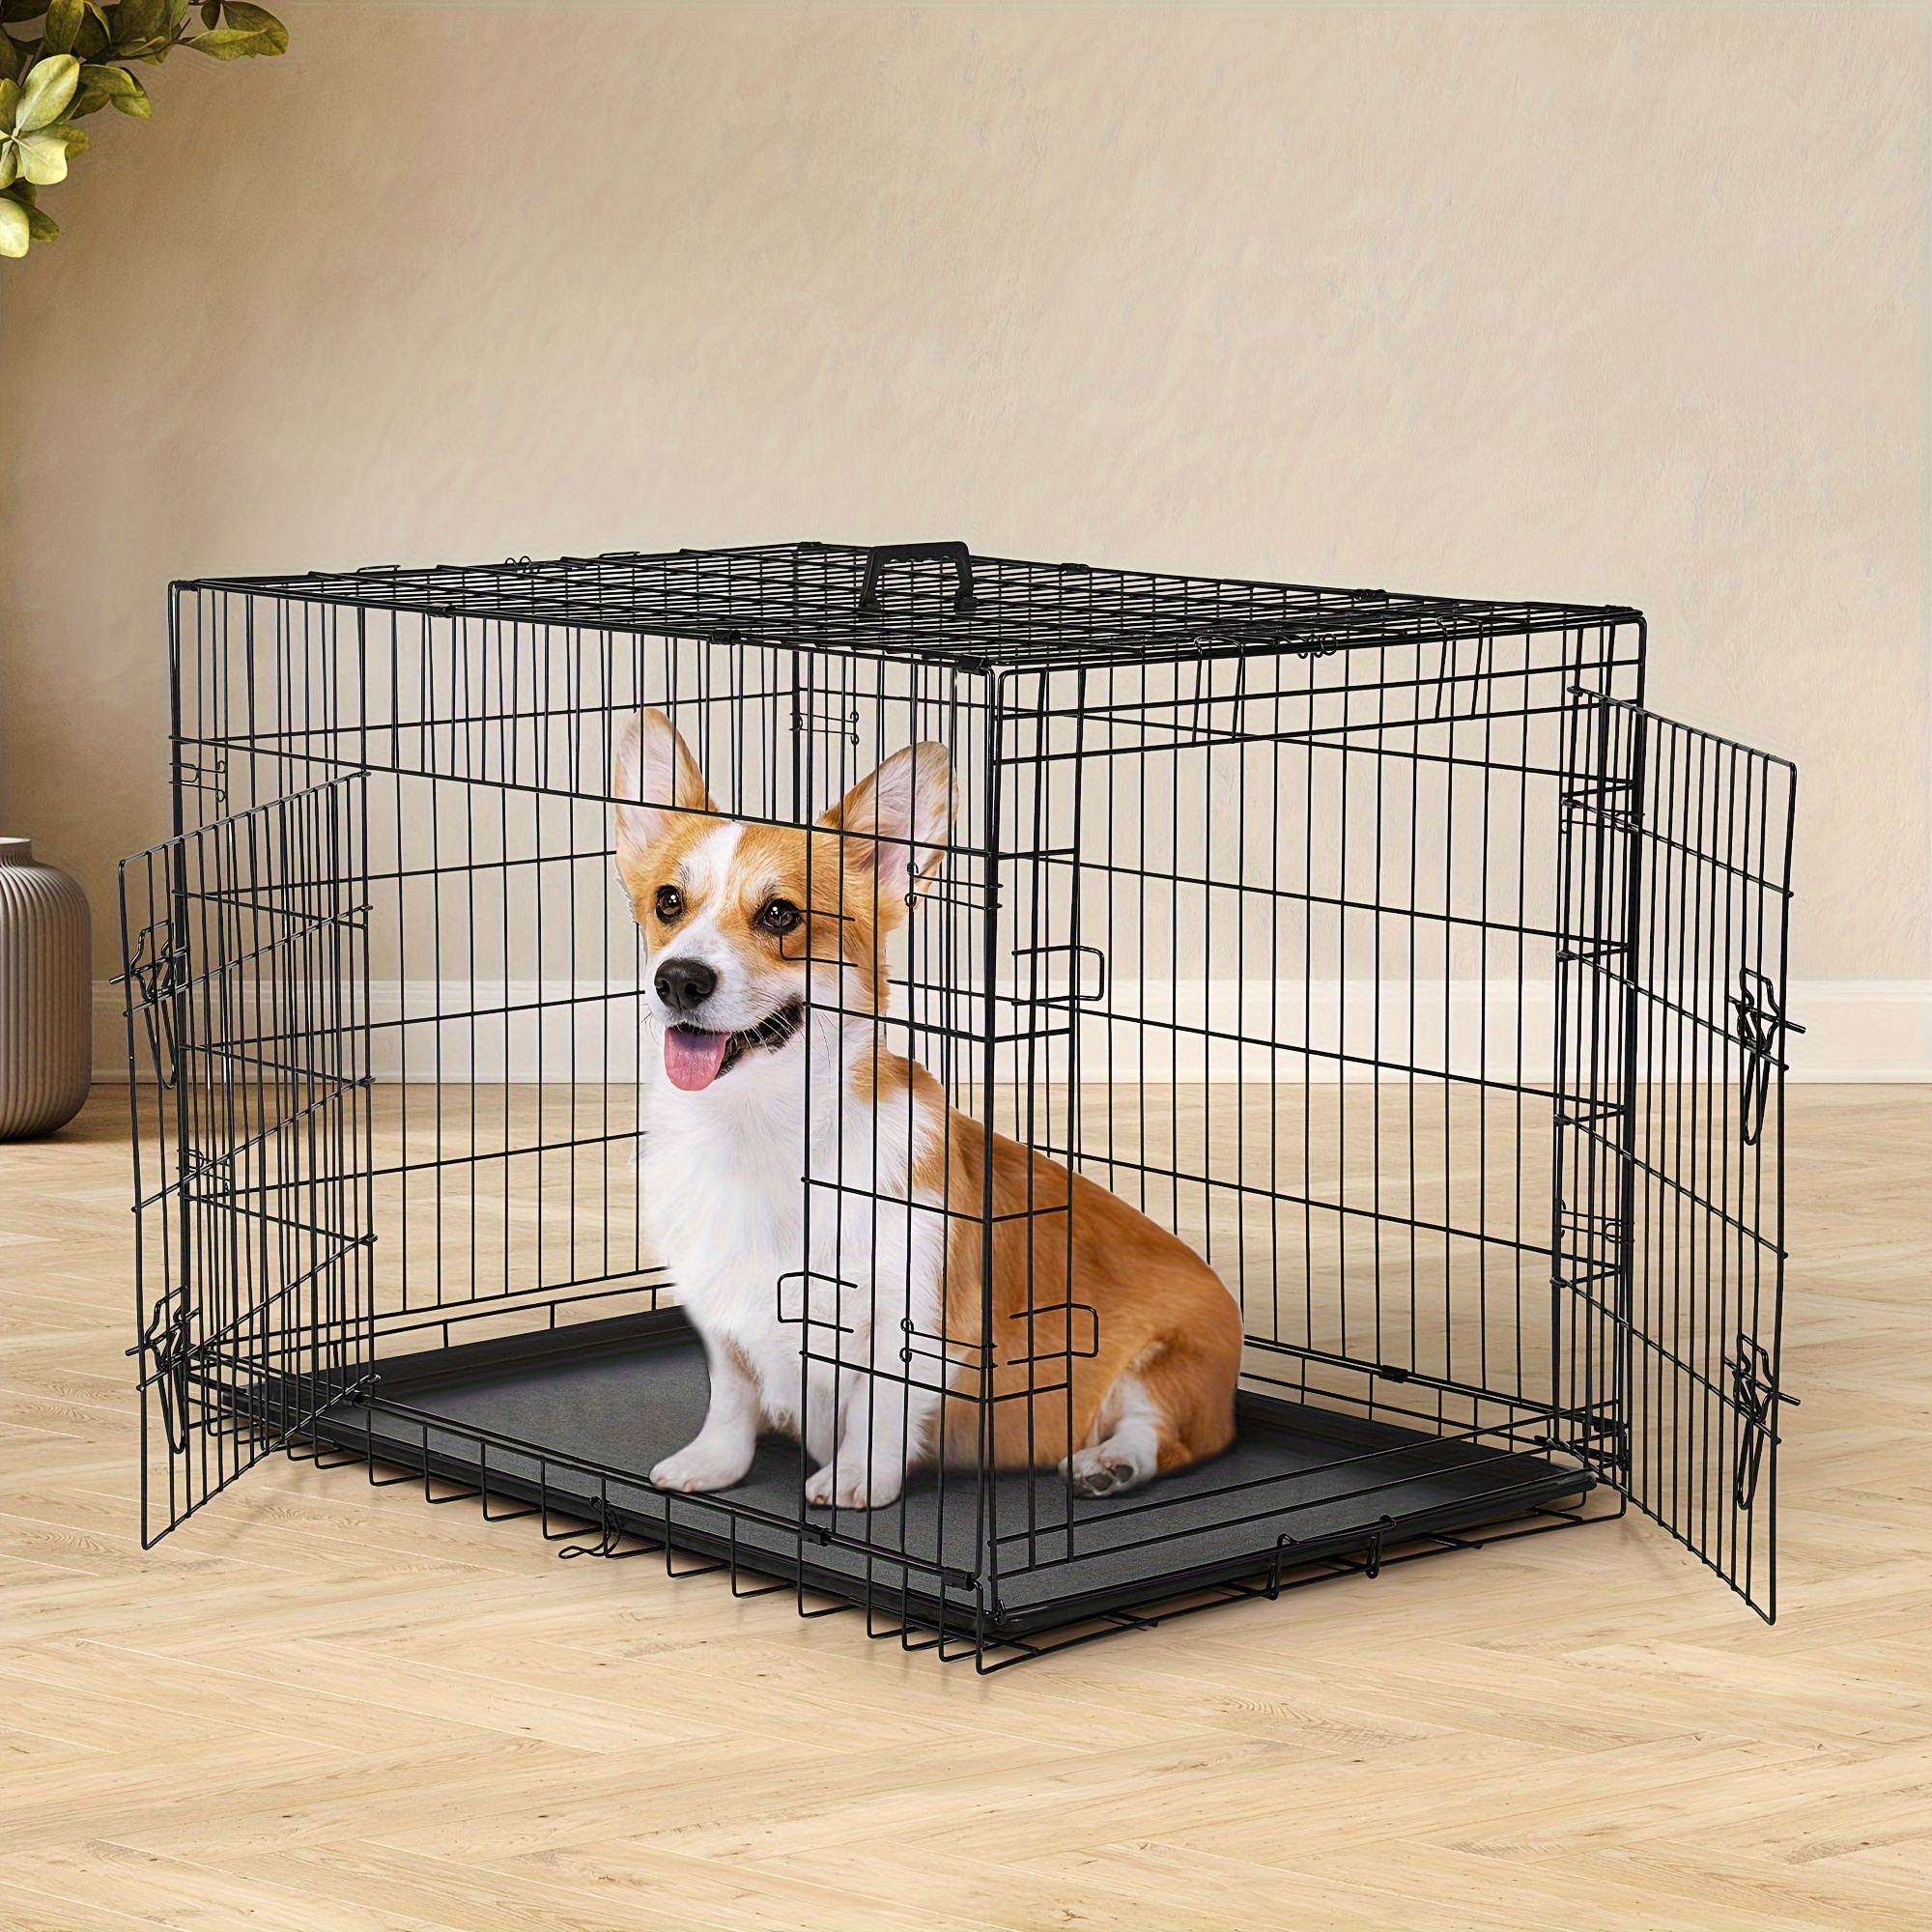 

36" Black Metal Wire Dog Crate For Medium Dogs (39.7-70.5 Lbs), Foldable Pet Kennel With Divider, Dual Doors, Slide-bolt Locks & Leak-proof Pan - Versatile Indoor/outdoor Travel Cage